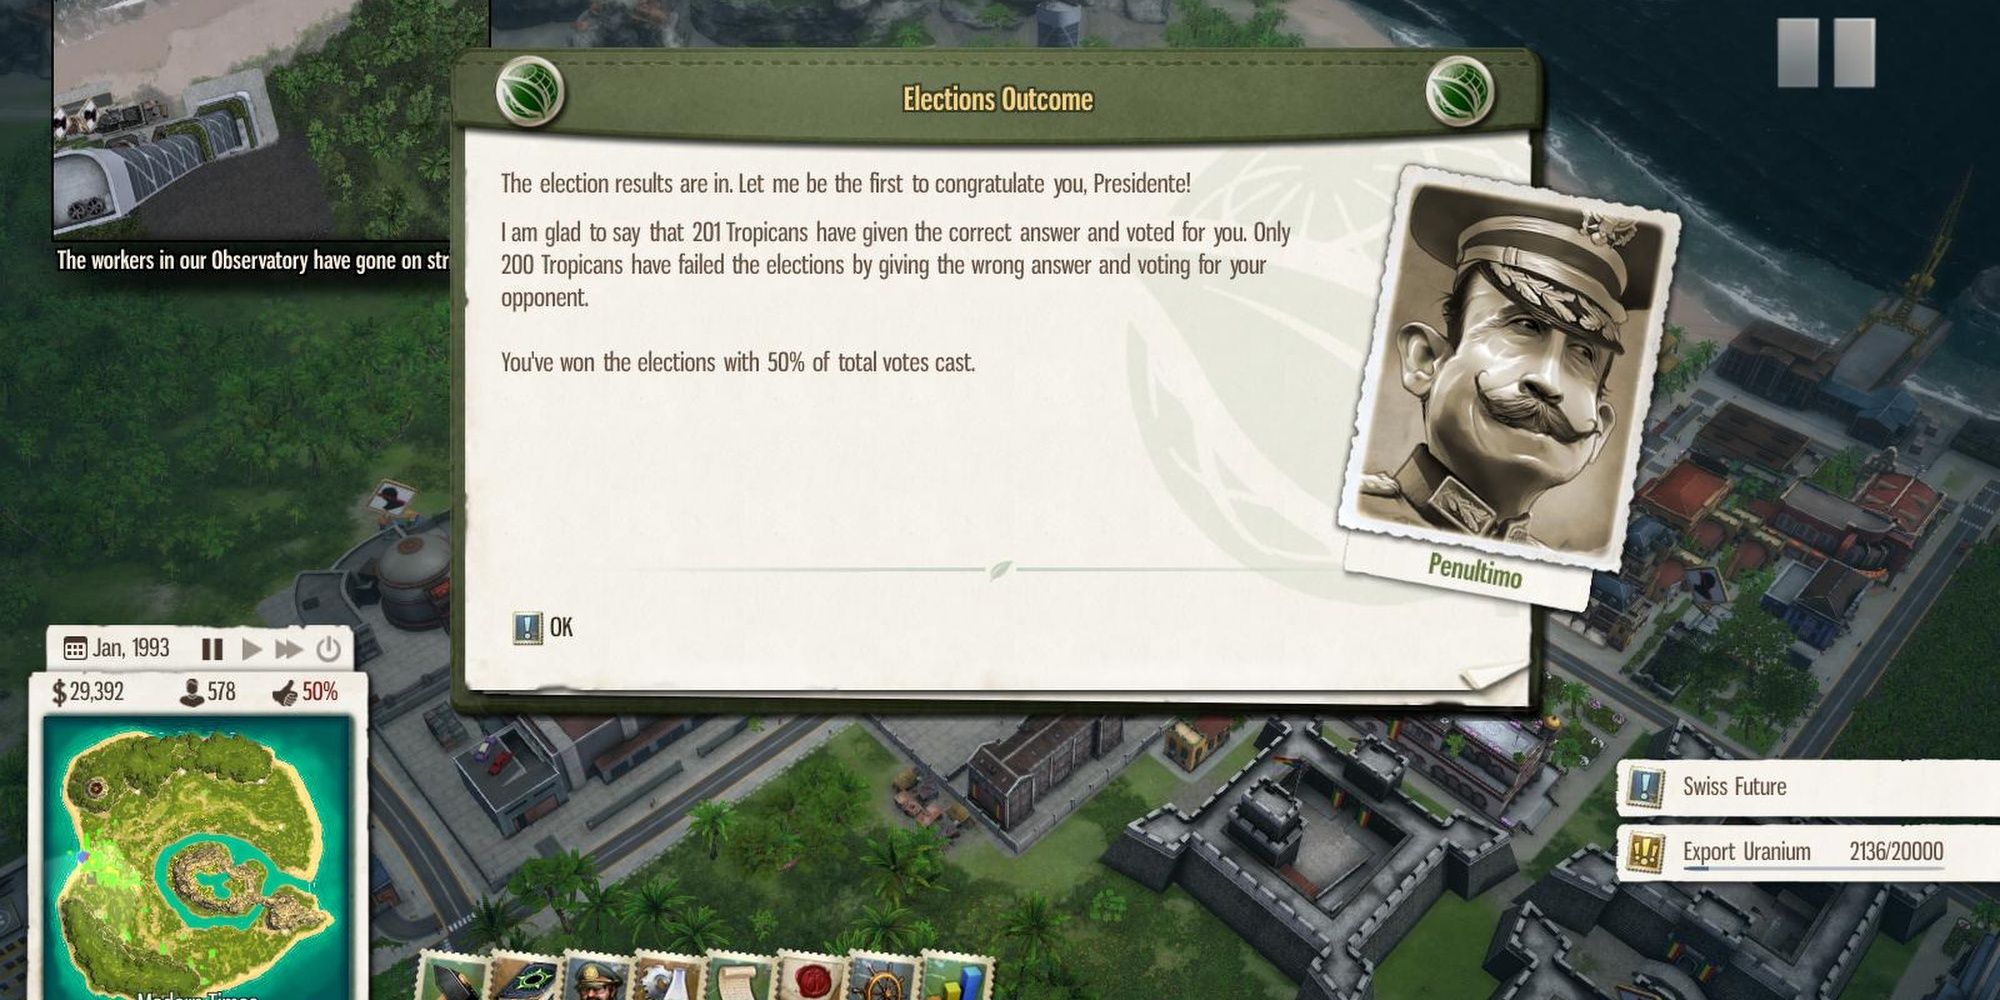 Tropico 6 Elections Outcome Shows That Players' "El Presidente" Has Won The Election